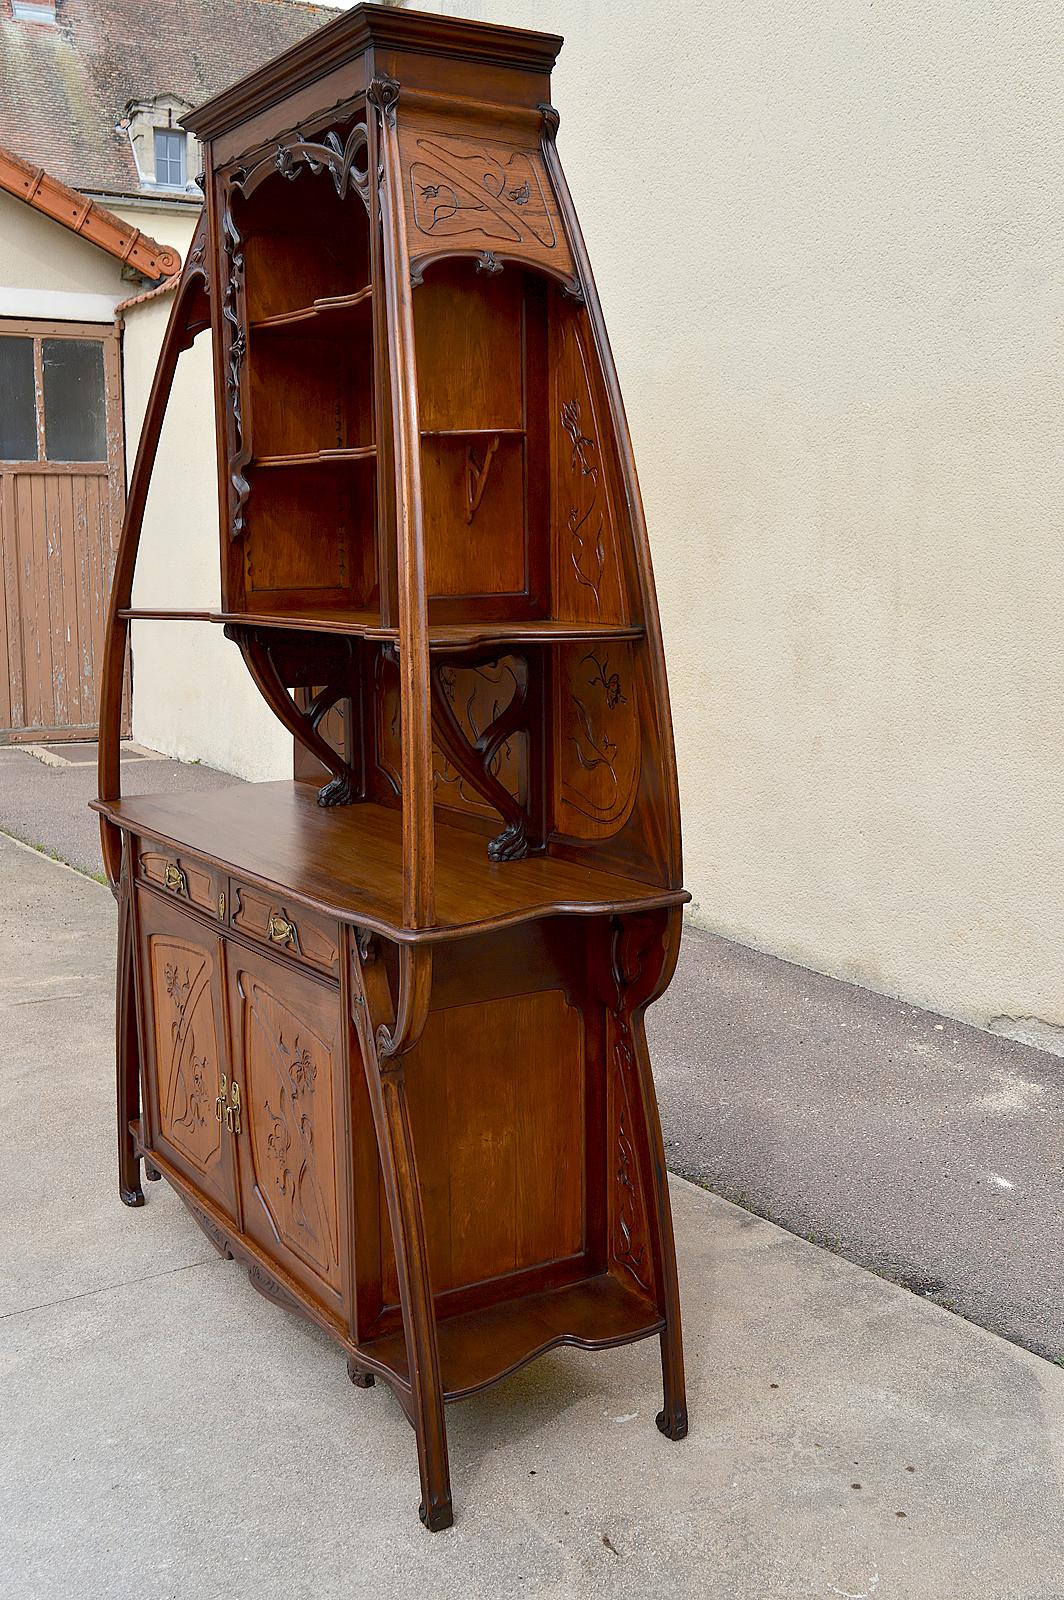 French Art Nouveau Buffet by Louis Brouhot, France, circa 1890